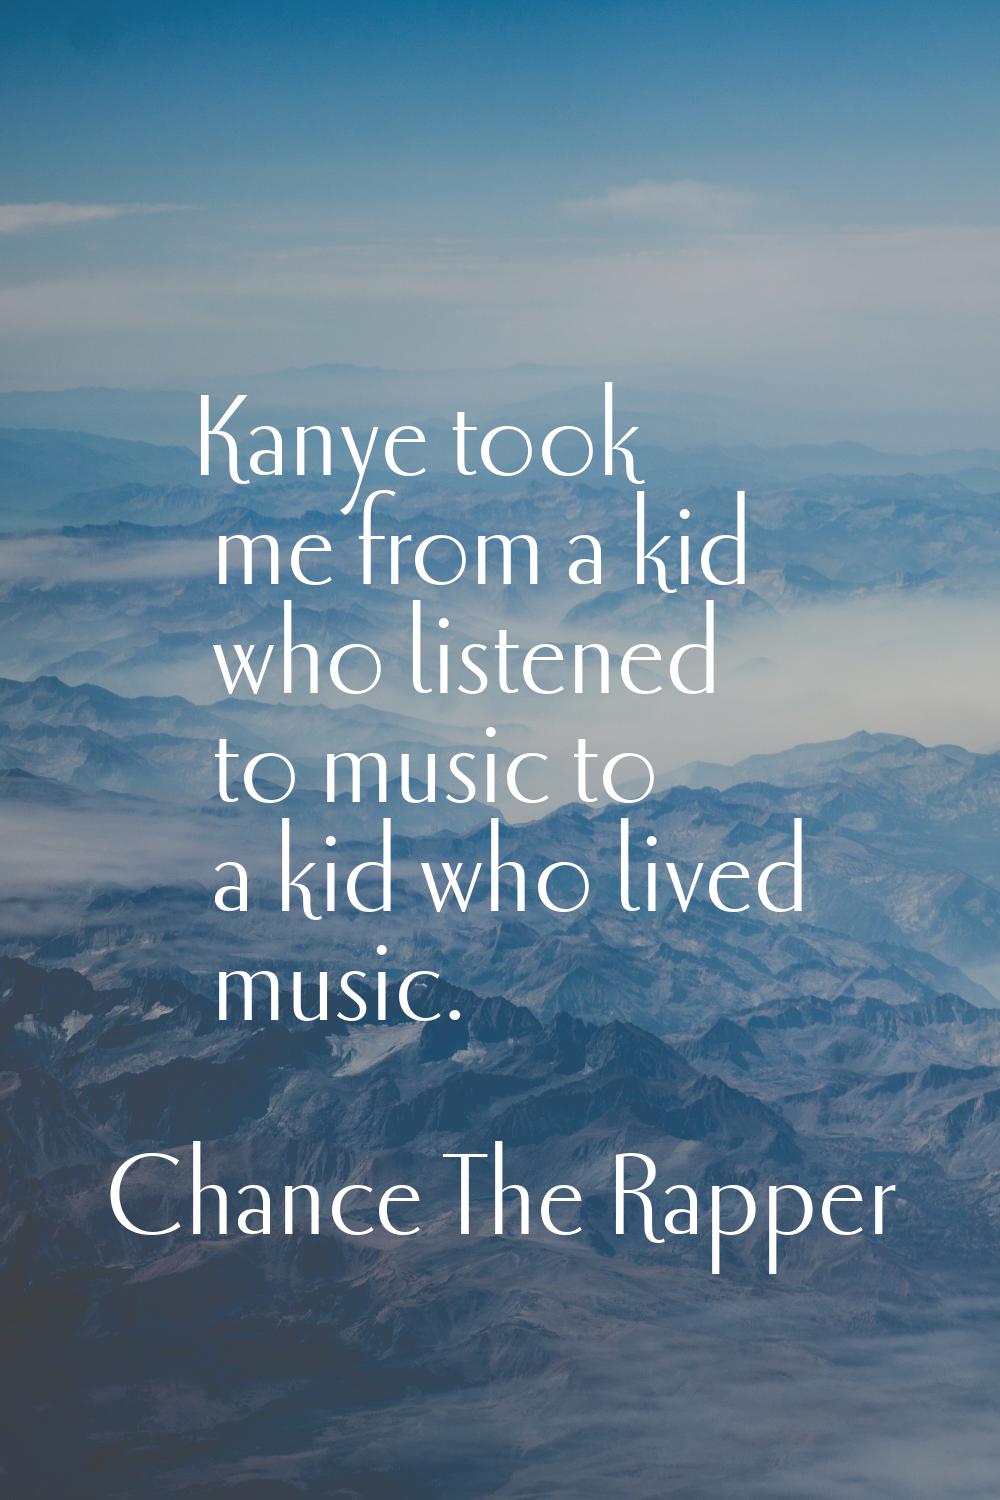 Kanye took me from a kid who listened to music to a kid who lived music.